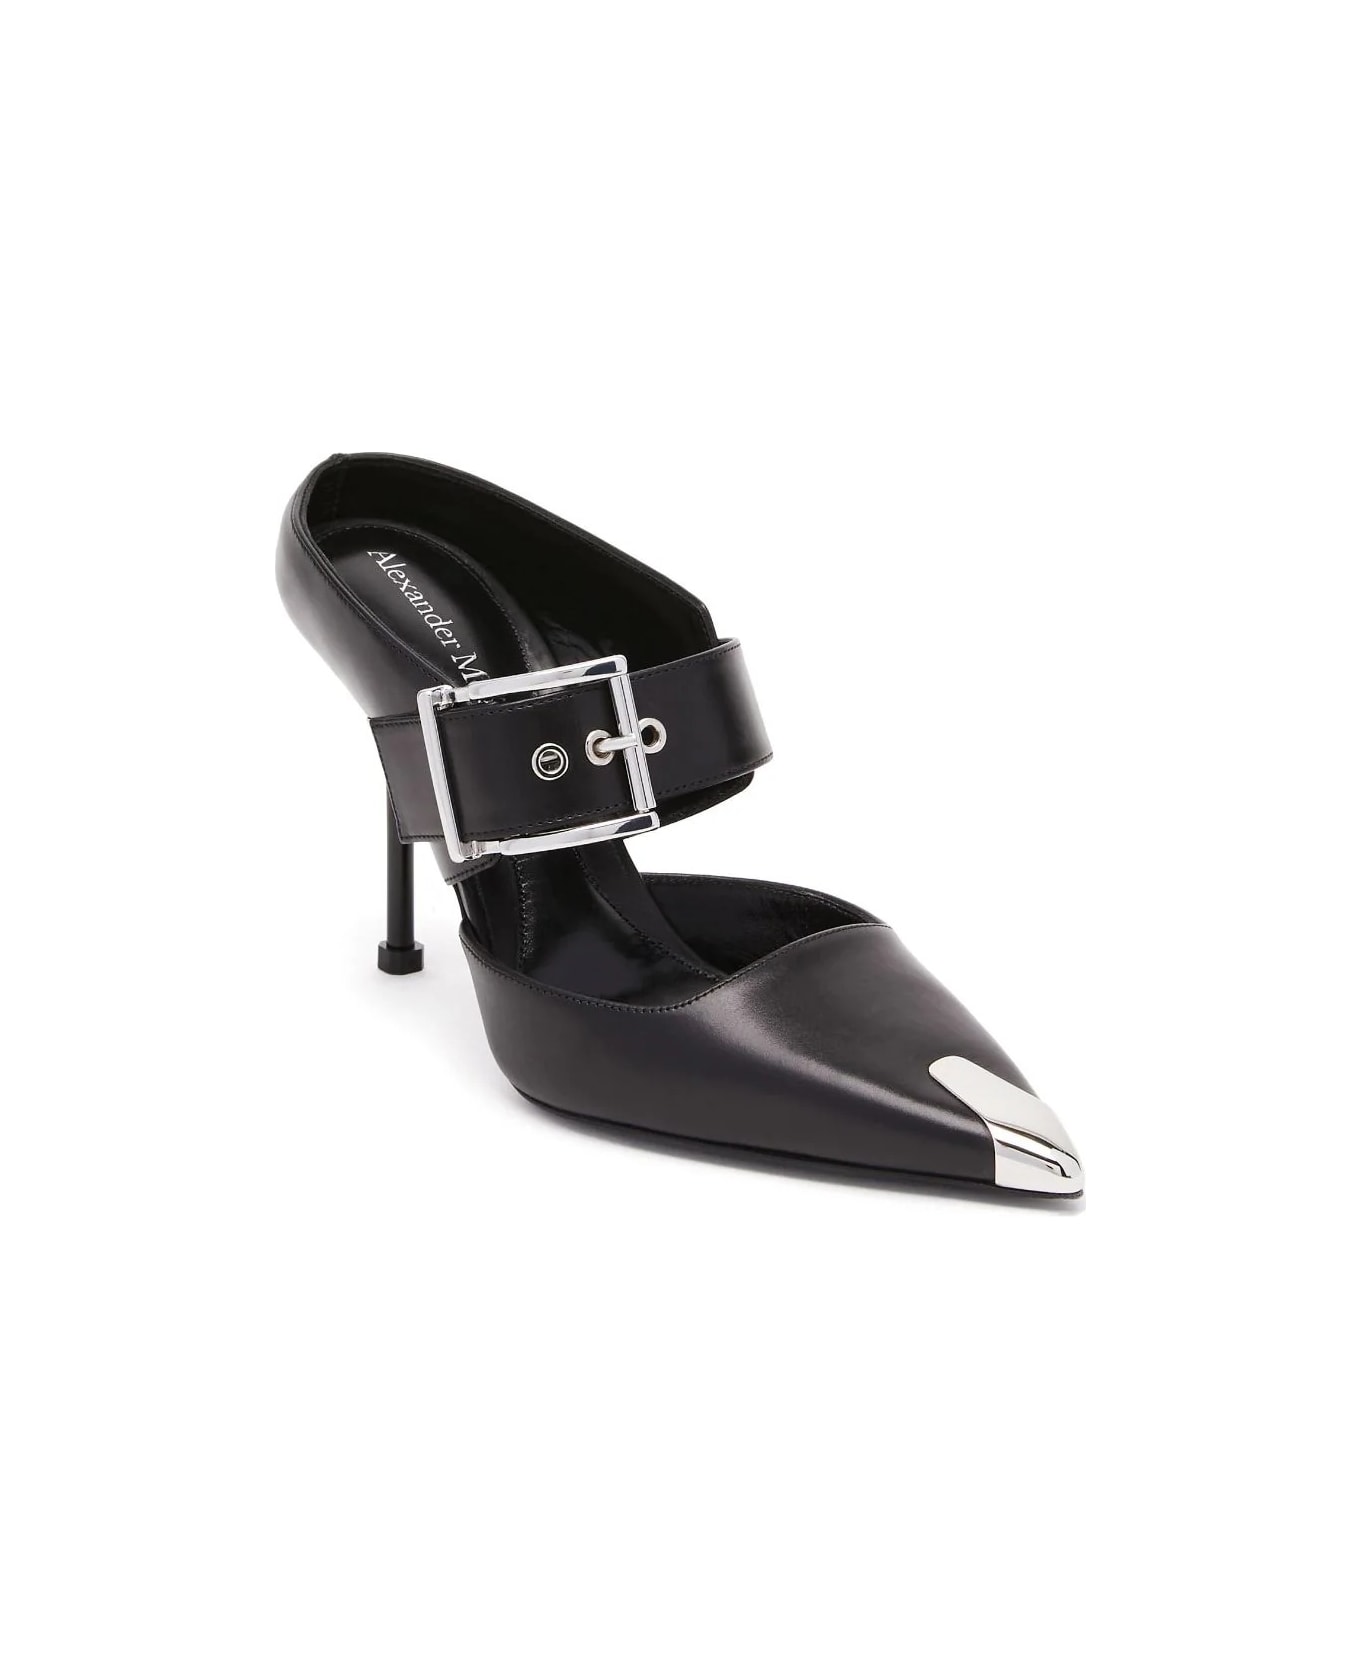 Alexander McQueen Punk Sandals With Buckle In Black And Silver - Black